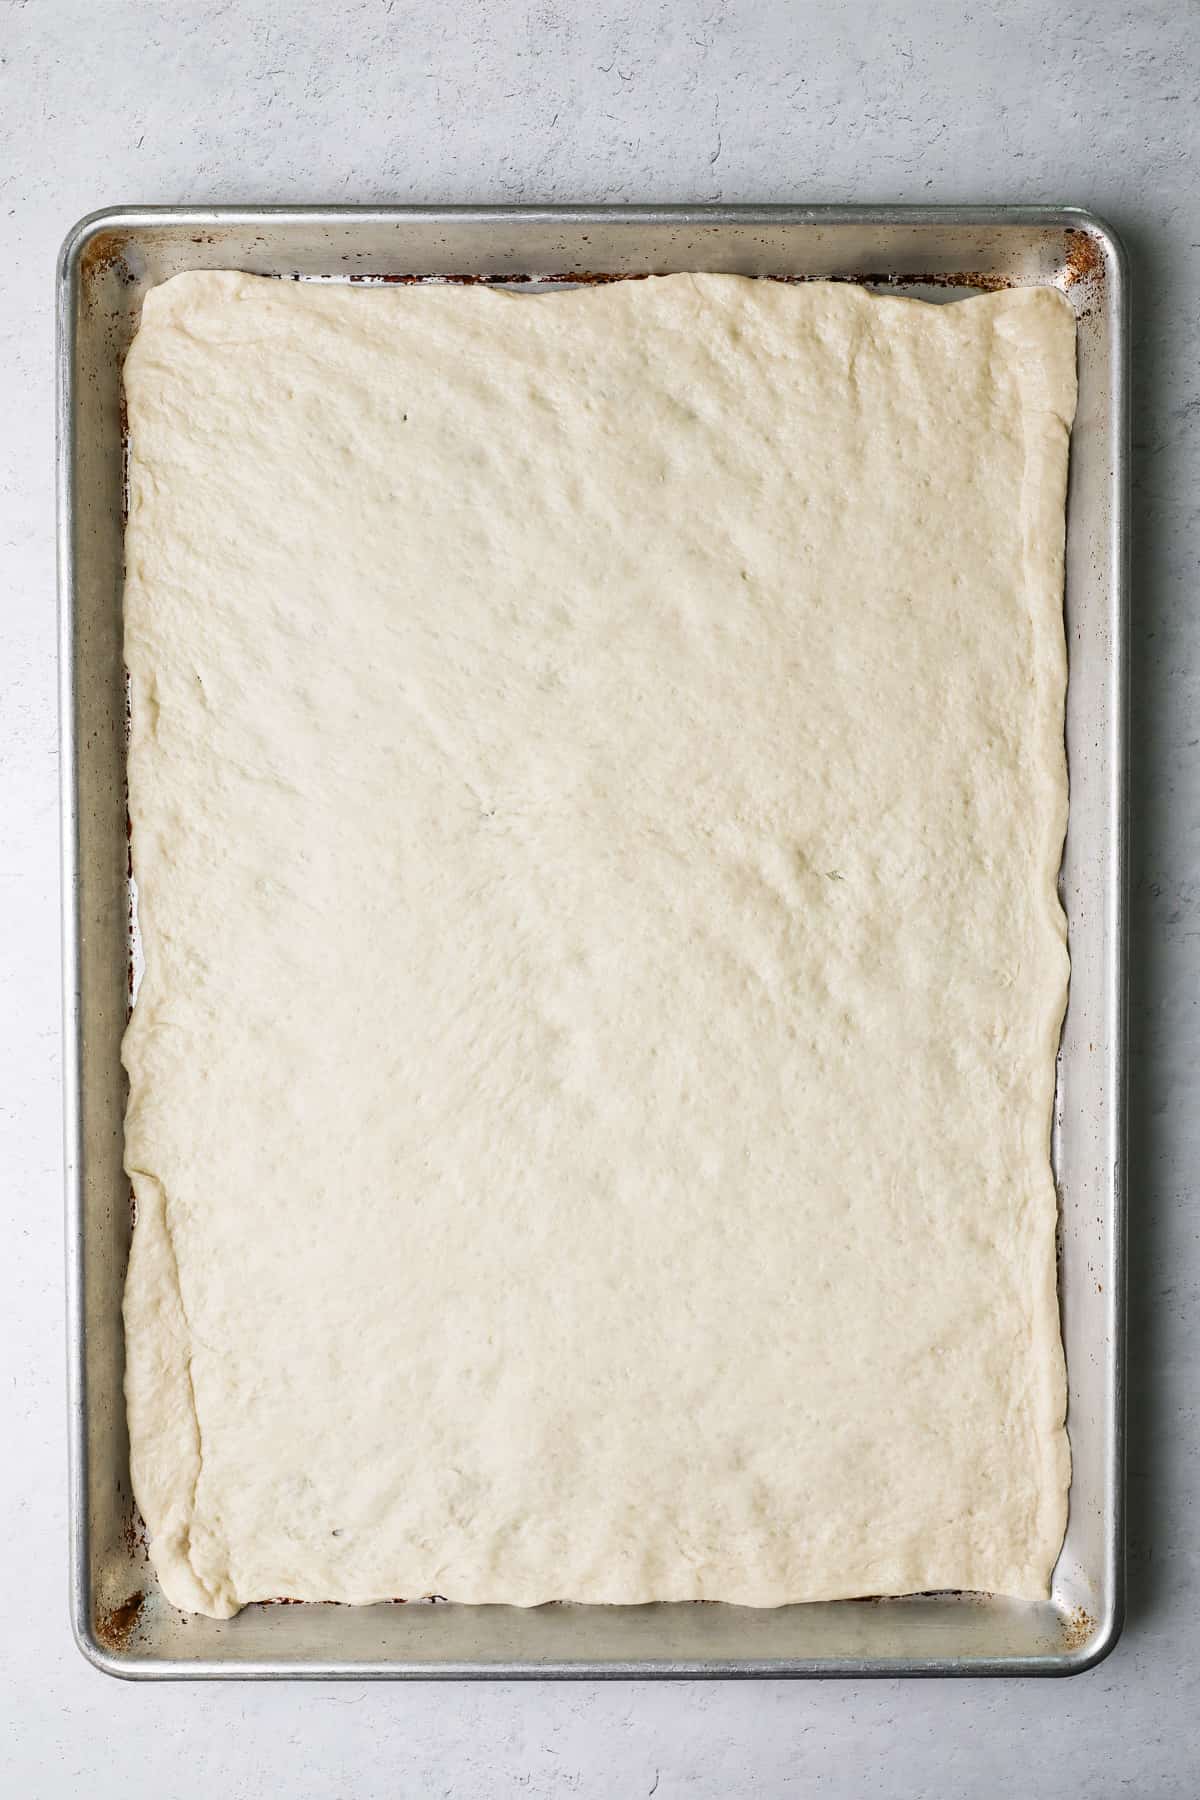 A pizza crust spread on a baking pan.